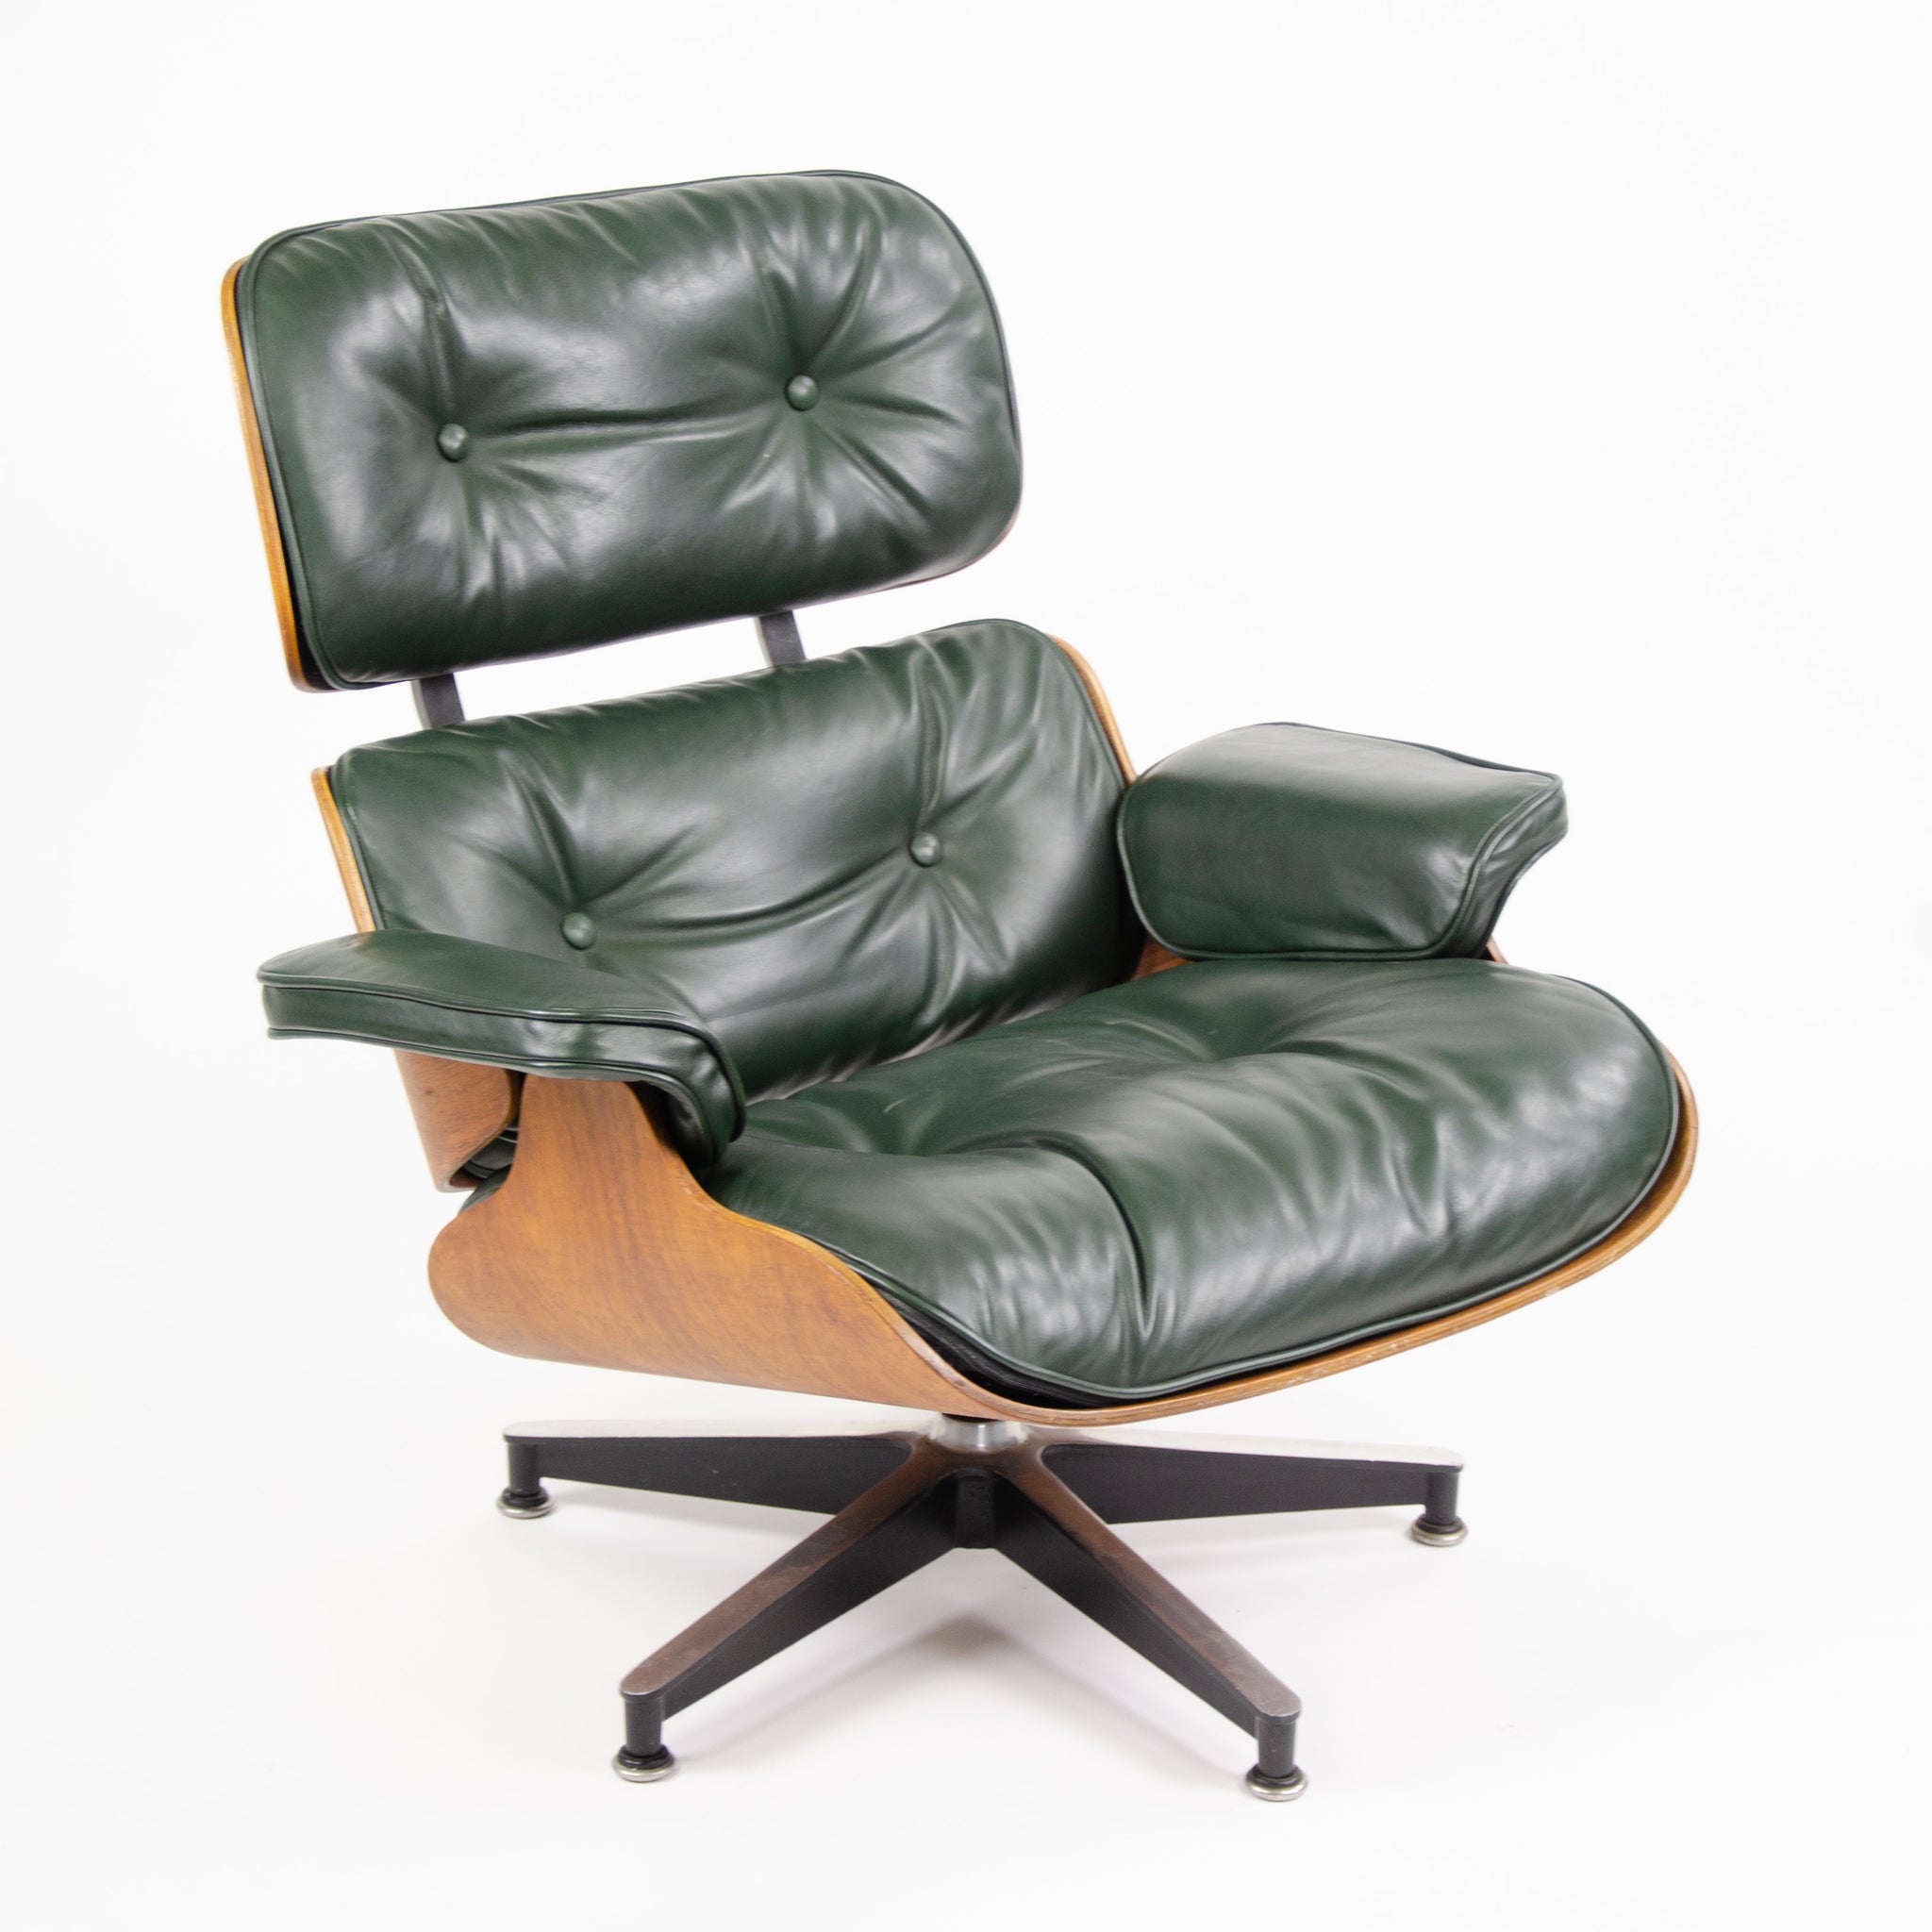 SOLD 1960's Herman Miller Eames Lounge Chair & Ottoman Rosewood 670 671 Green Leather